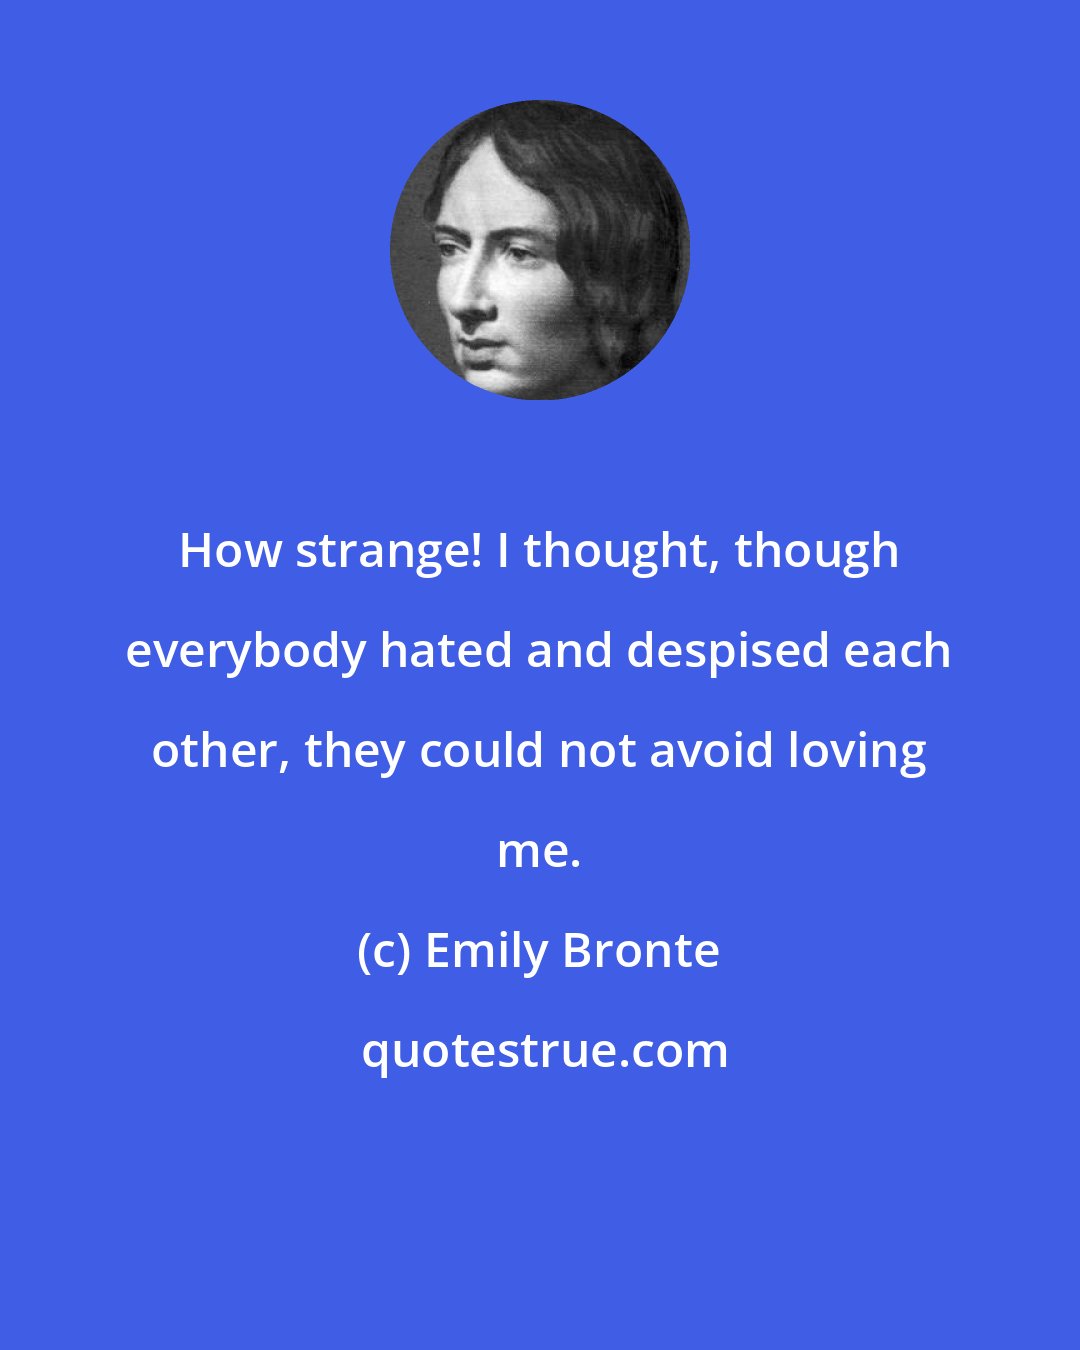 Emily Bronte: How strange! I thought, though everybody hated and despised each other, they could not avoid loving me.